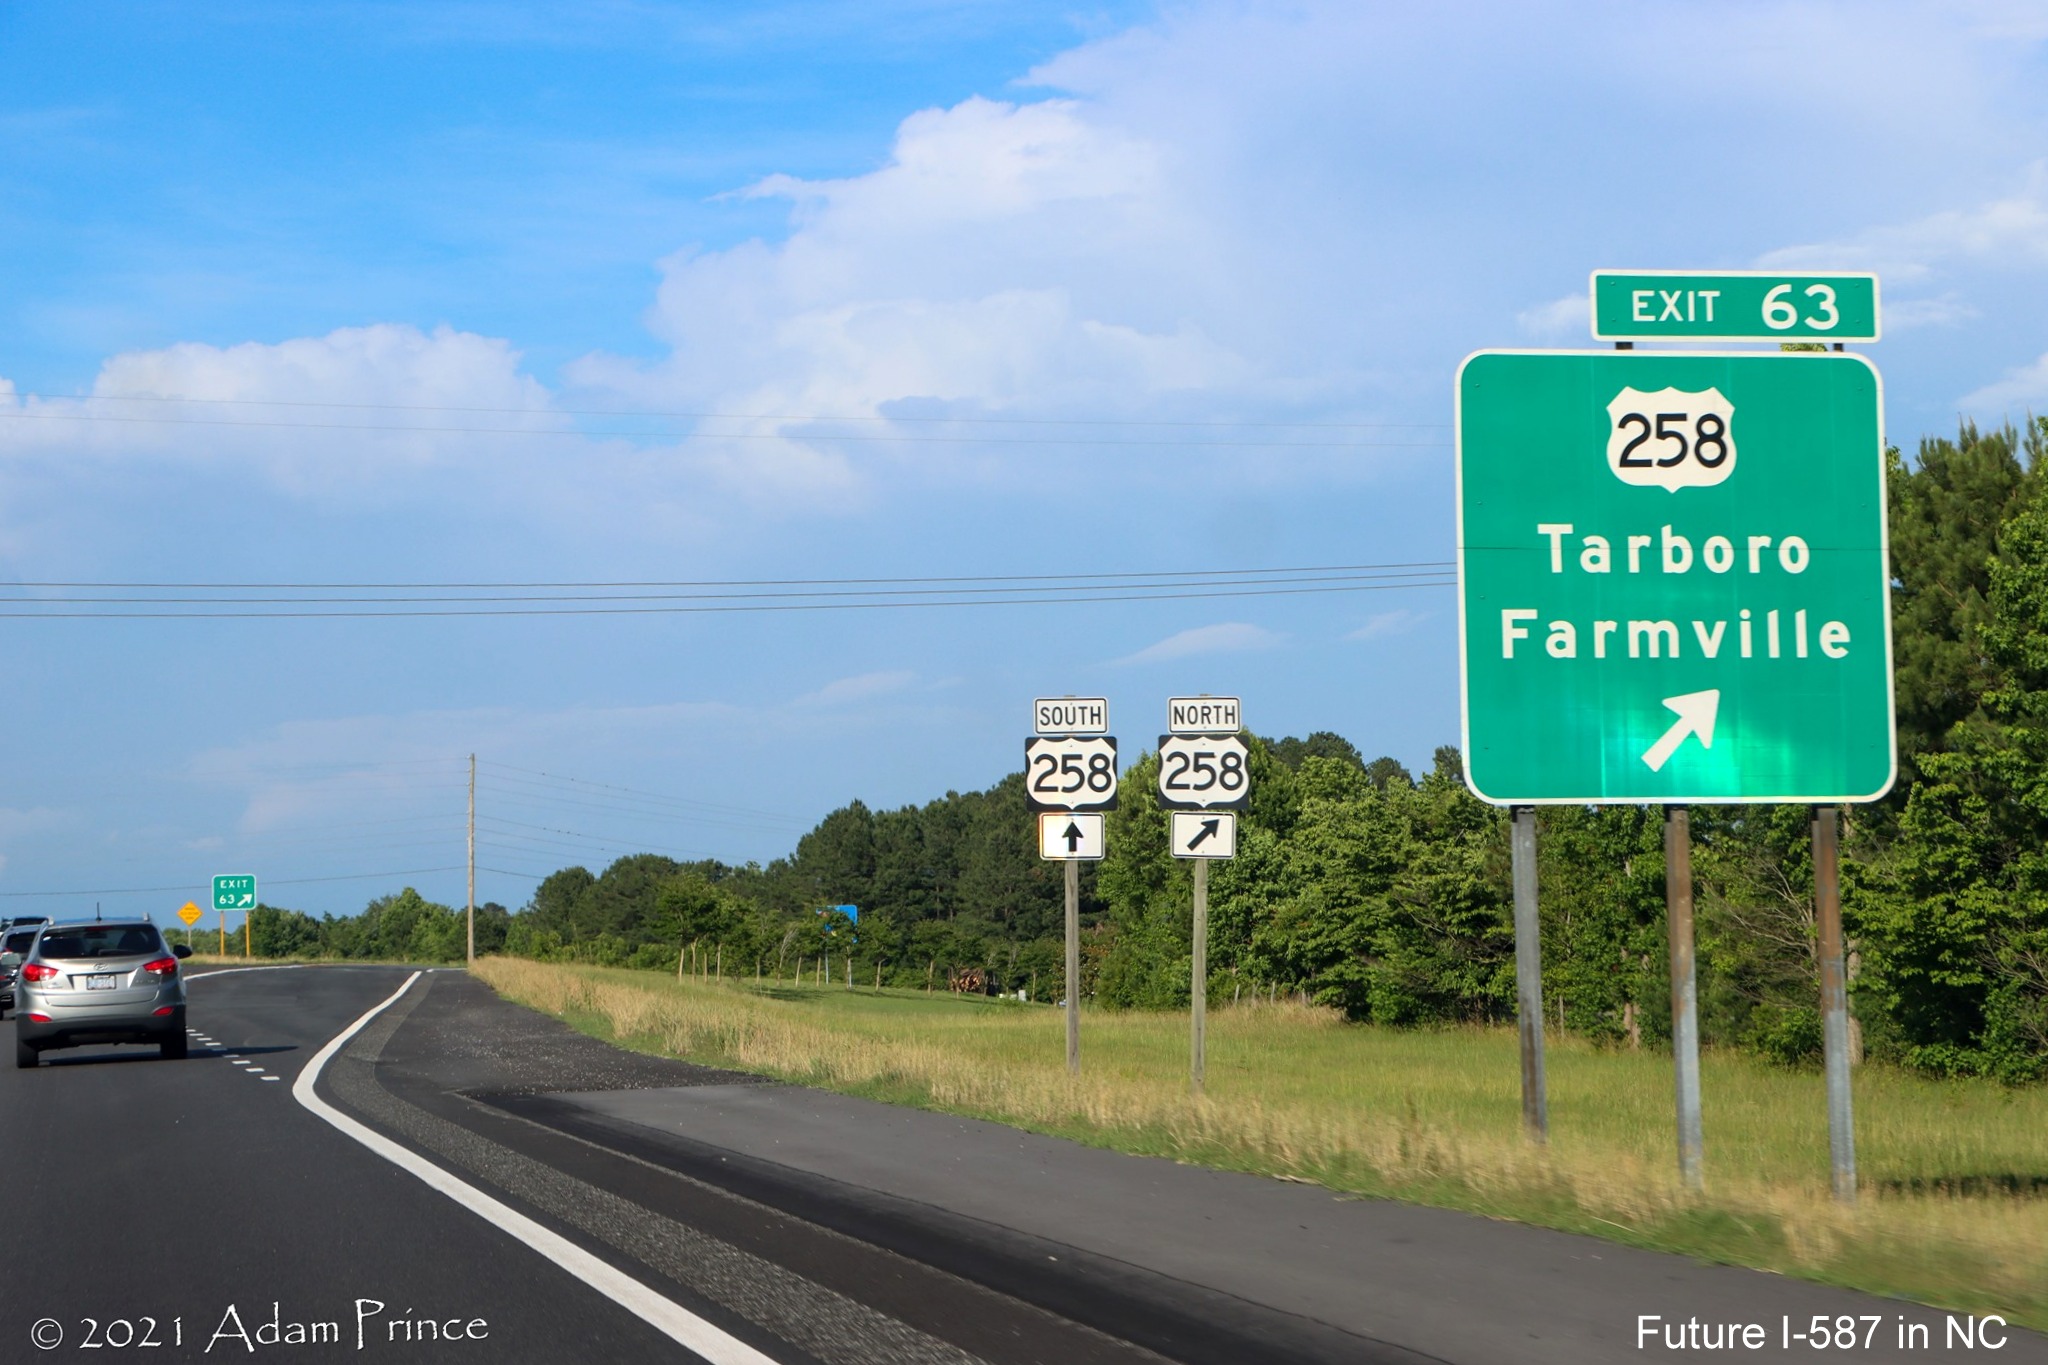 Ground mounted ramp sign for US 258 North exit on US 264 East (Future I-587 South) in Farmville, photo by Adam Prince, June 2021